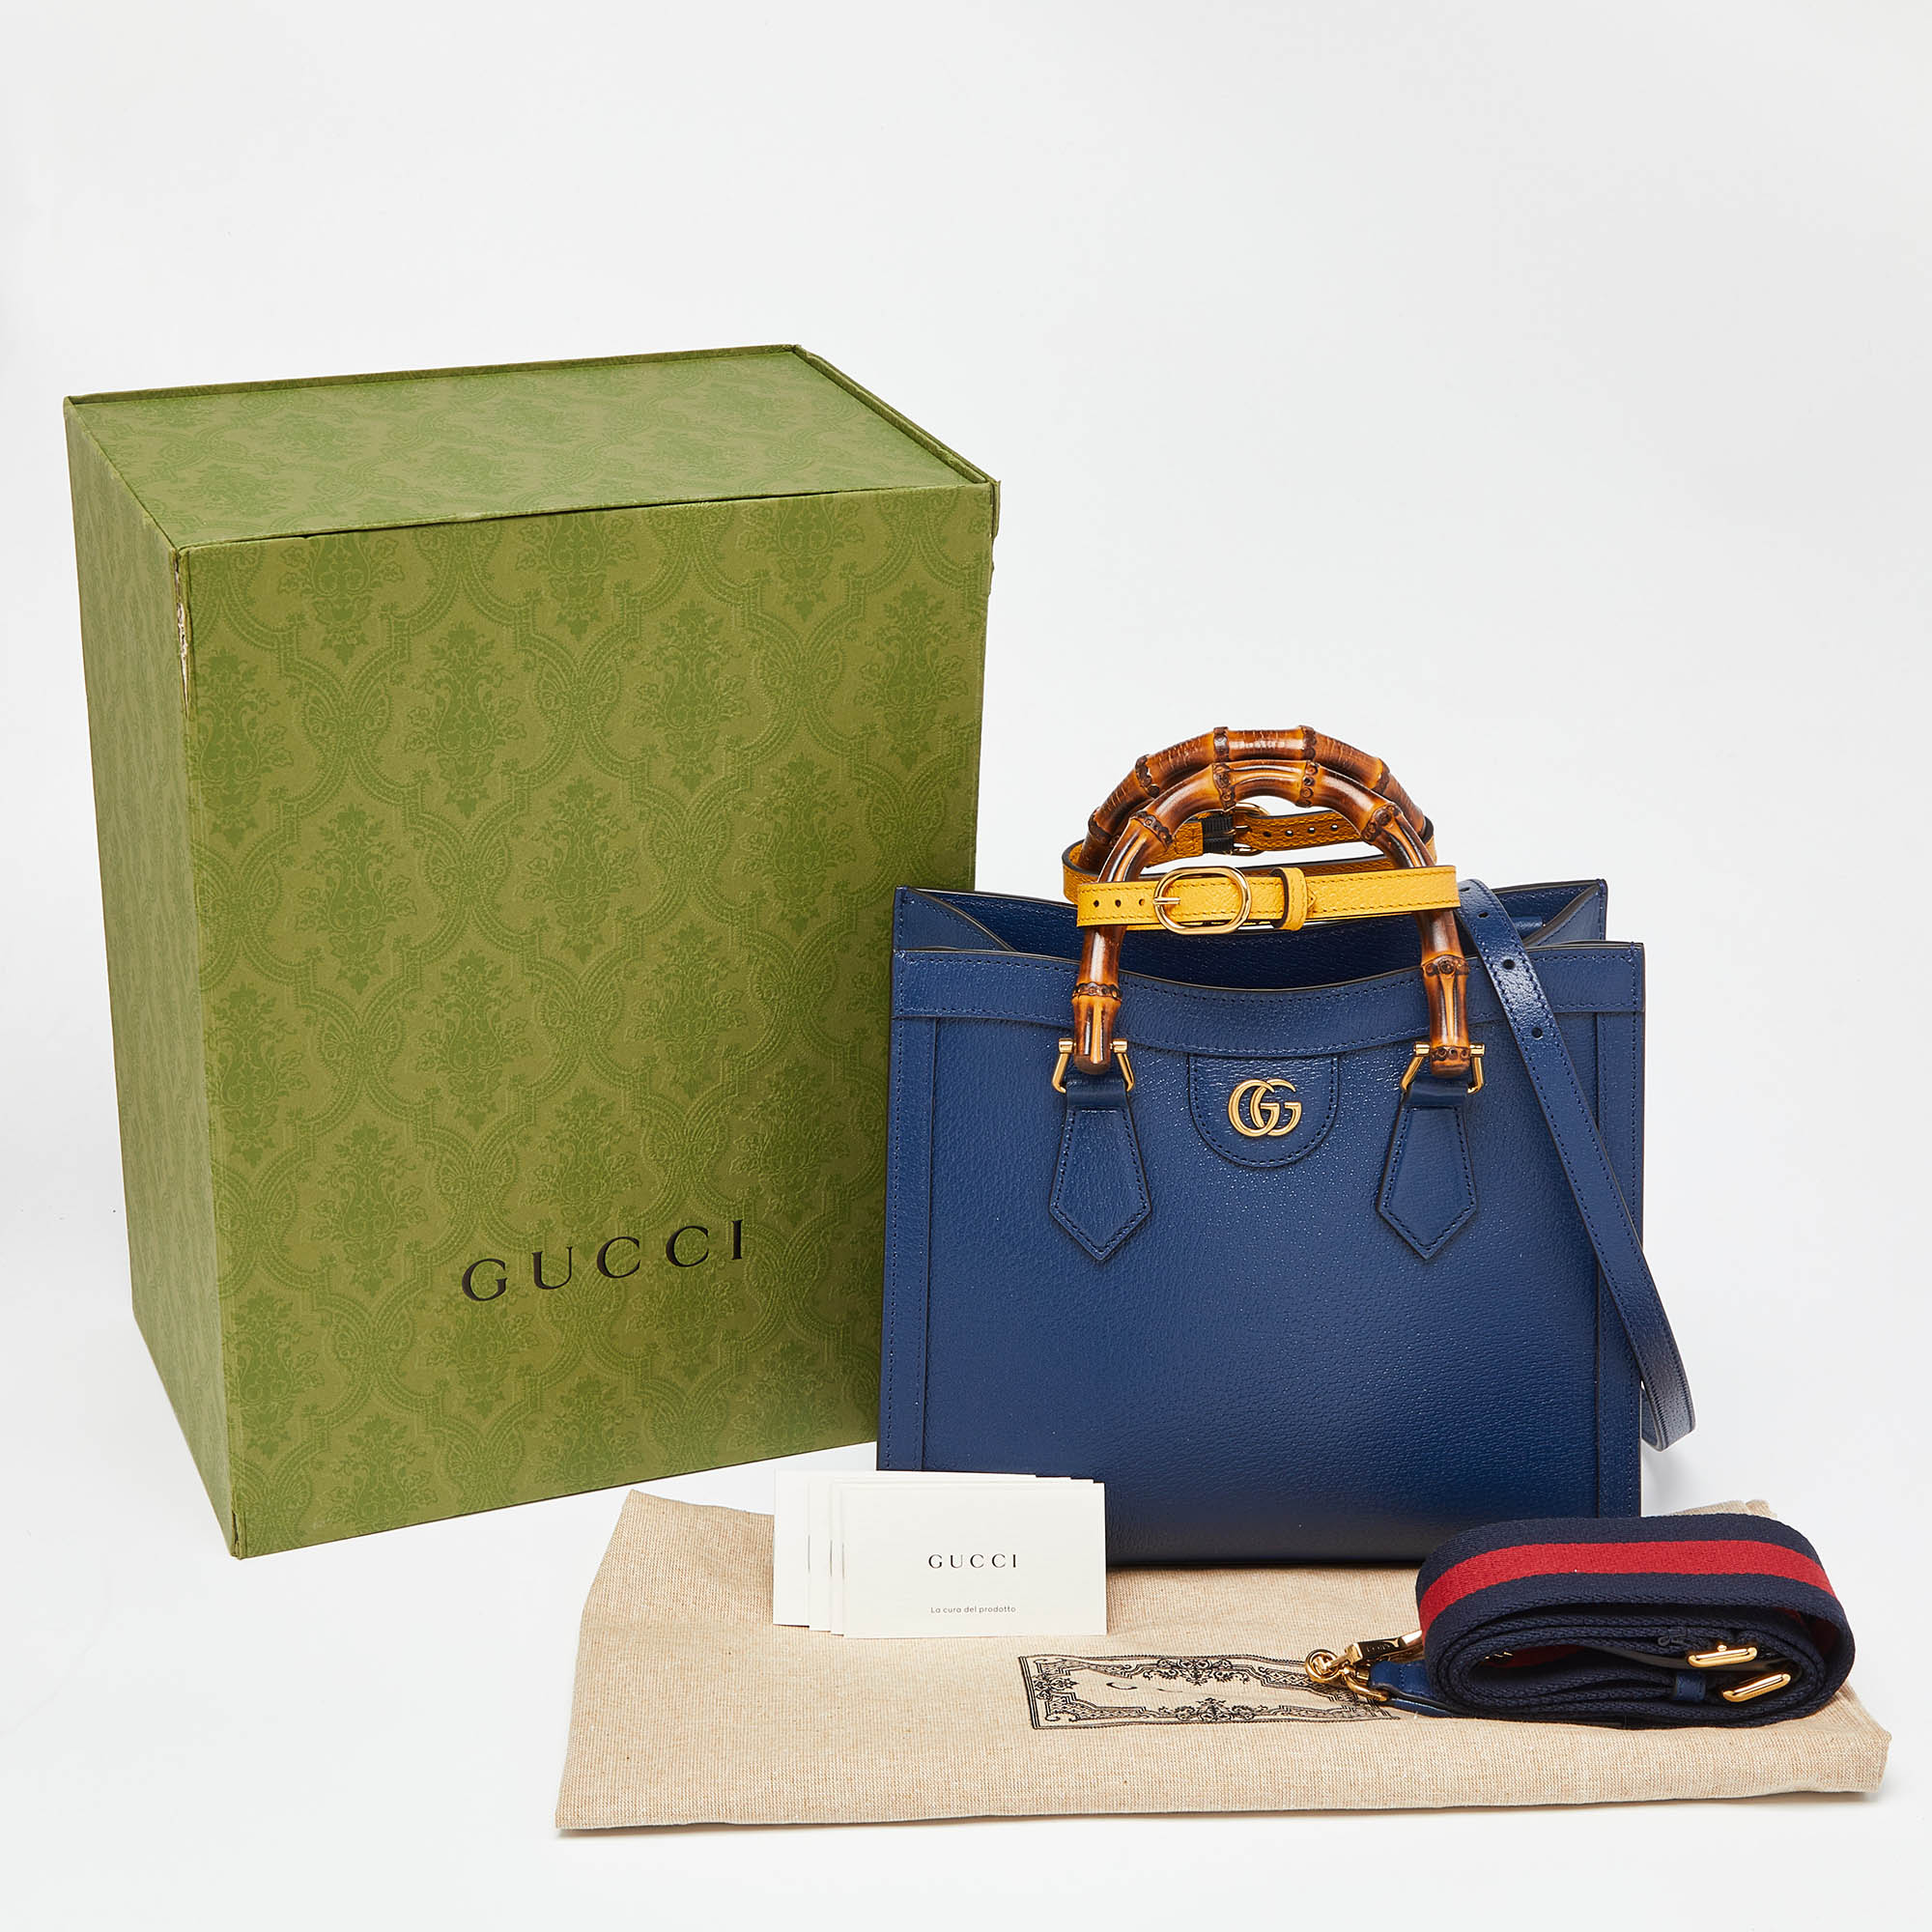 Gucci Navy Blue Leather Small Diana Tote